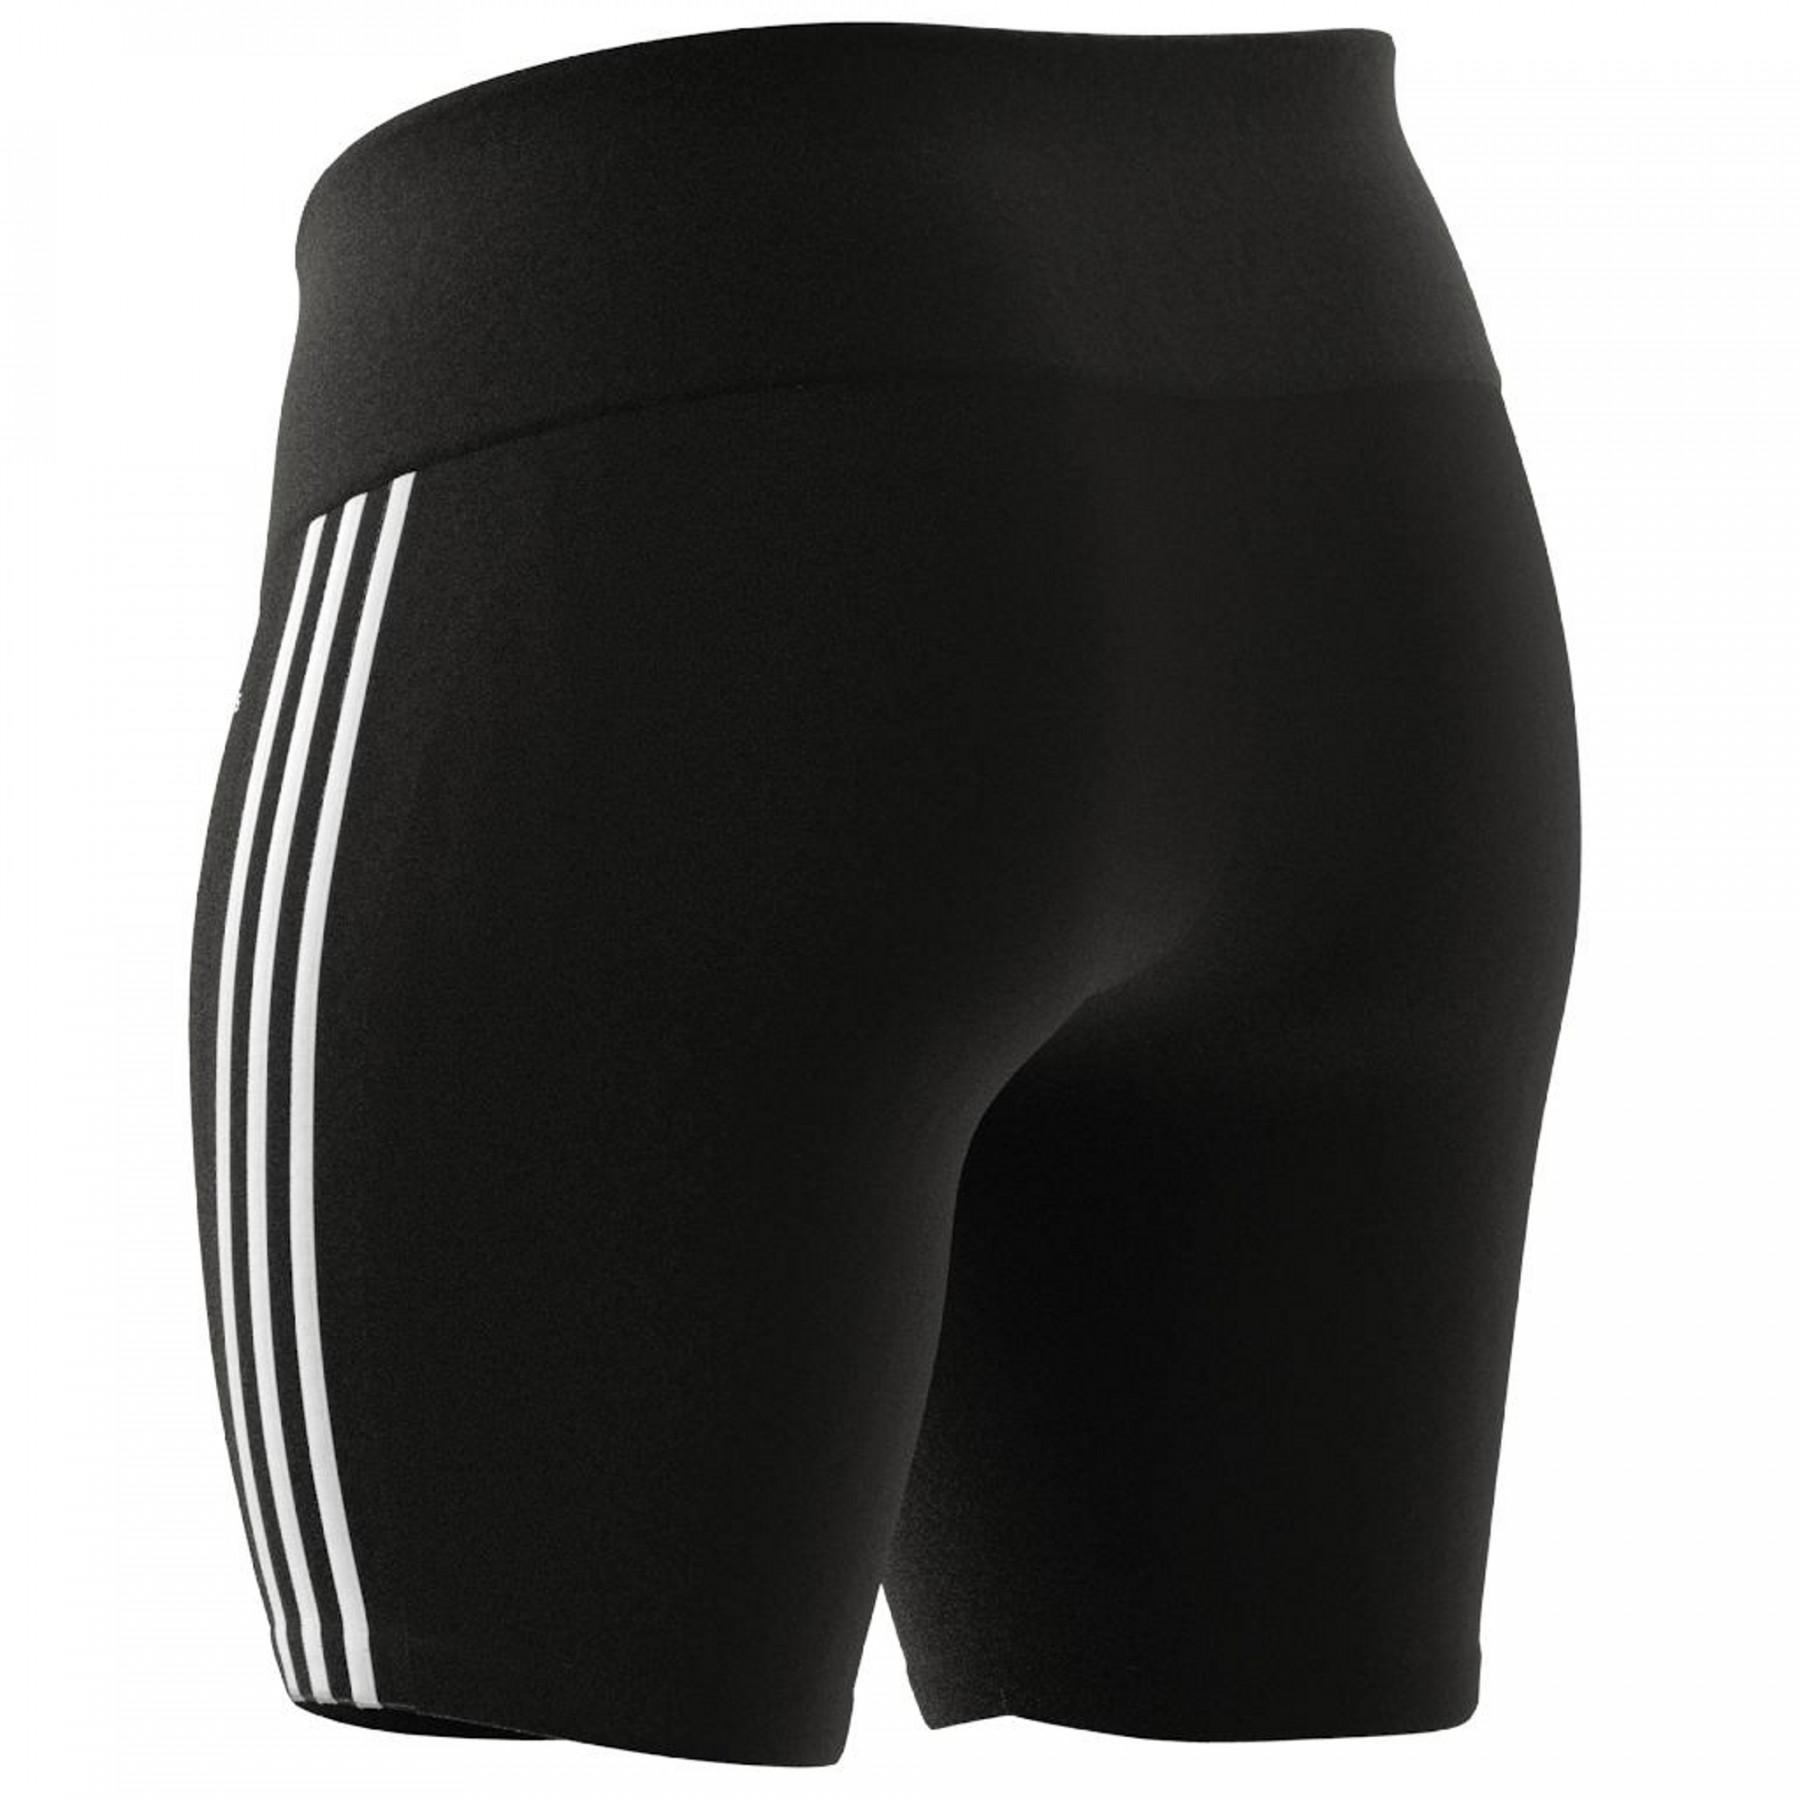 Ciclista adidas High Riseport Grande Taille